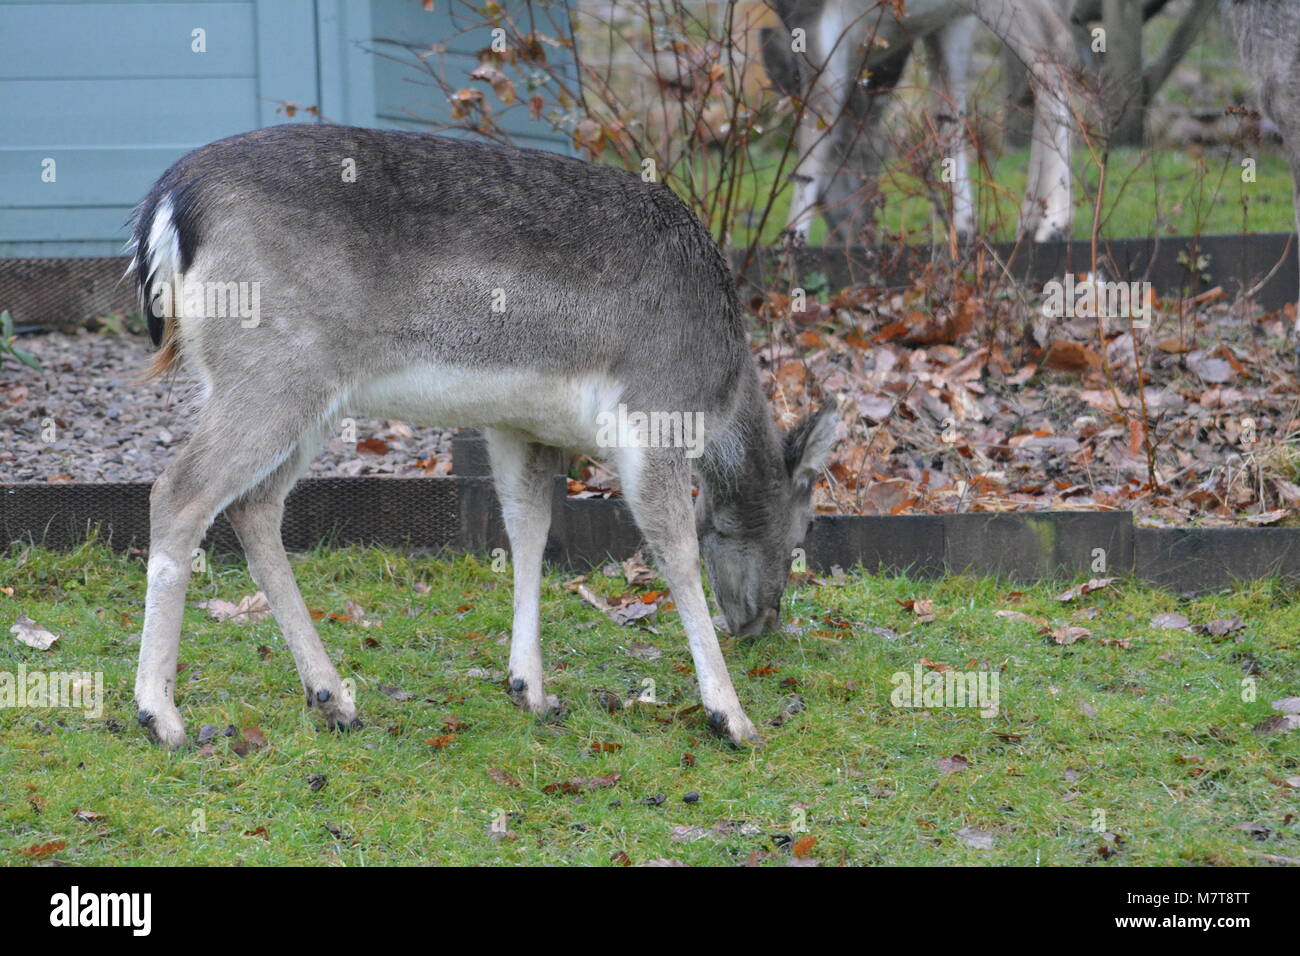 Close up of young Sika deer Cervus nippon close to painted summerhouse with stock wire fence and garden bed at back The Doward Herefordshire England Stock Photo